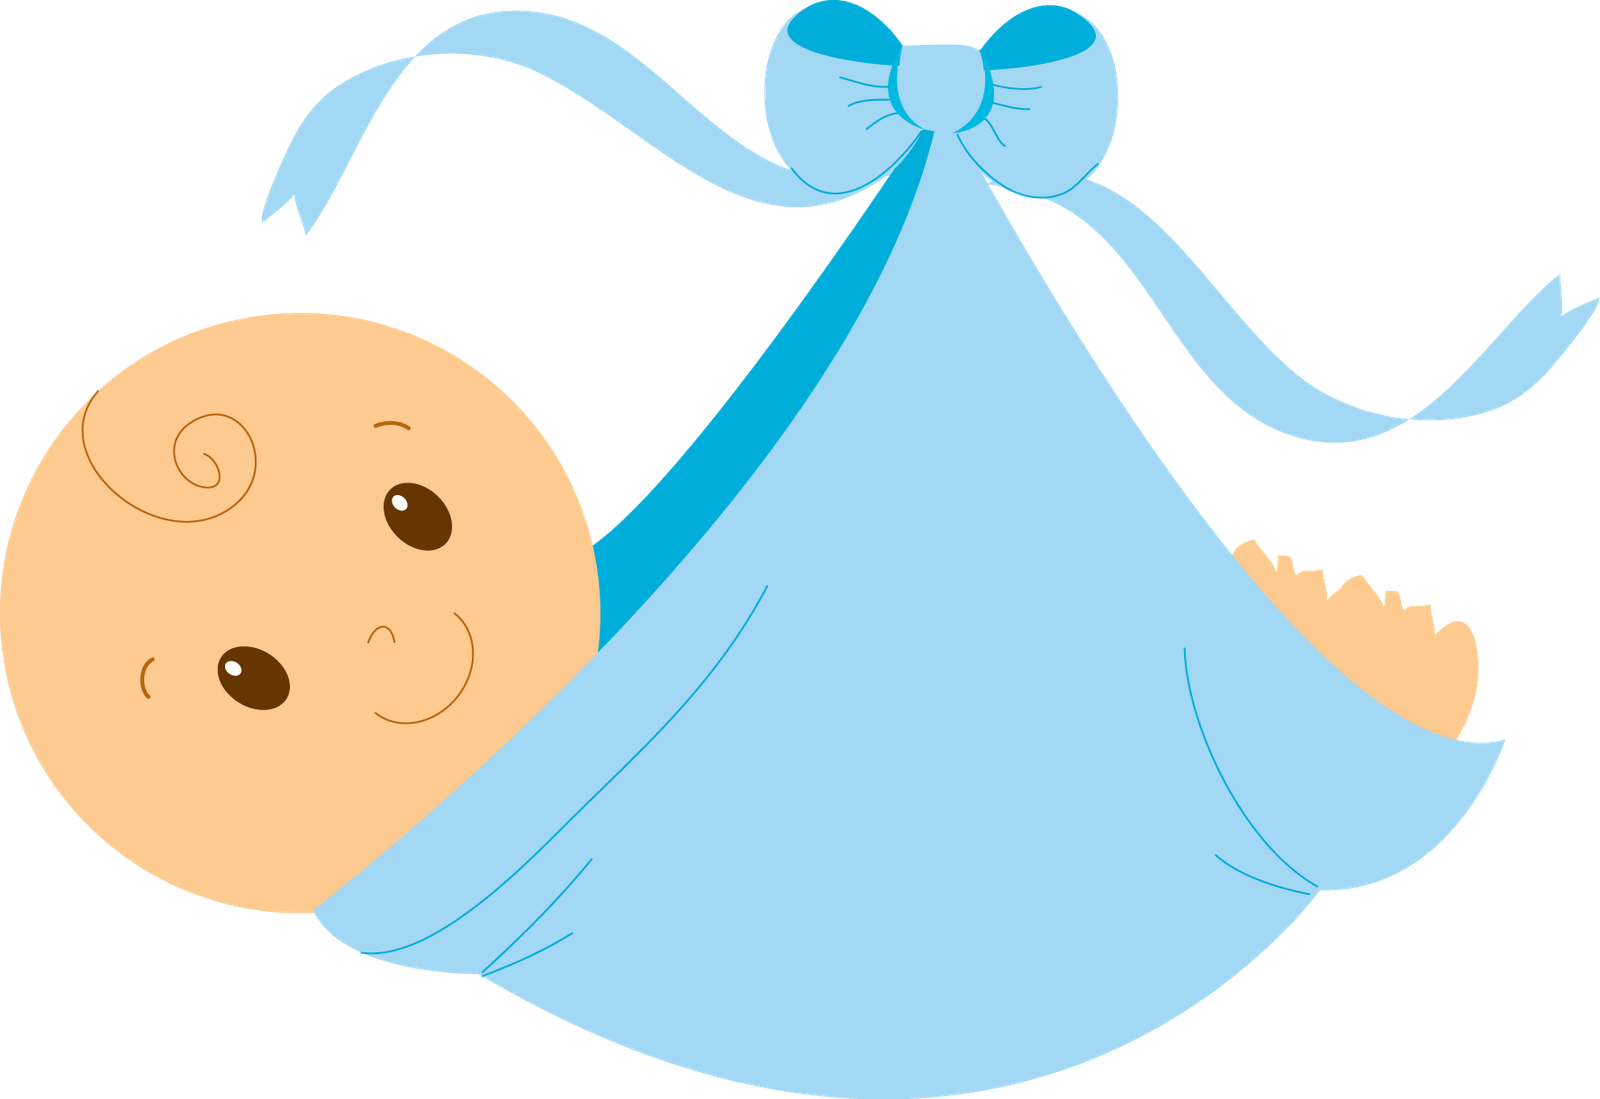 Displaying baby rattle clipart | ClipartMonk - Free Clip Art Images